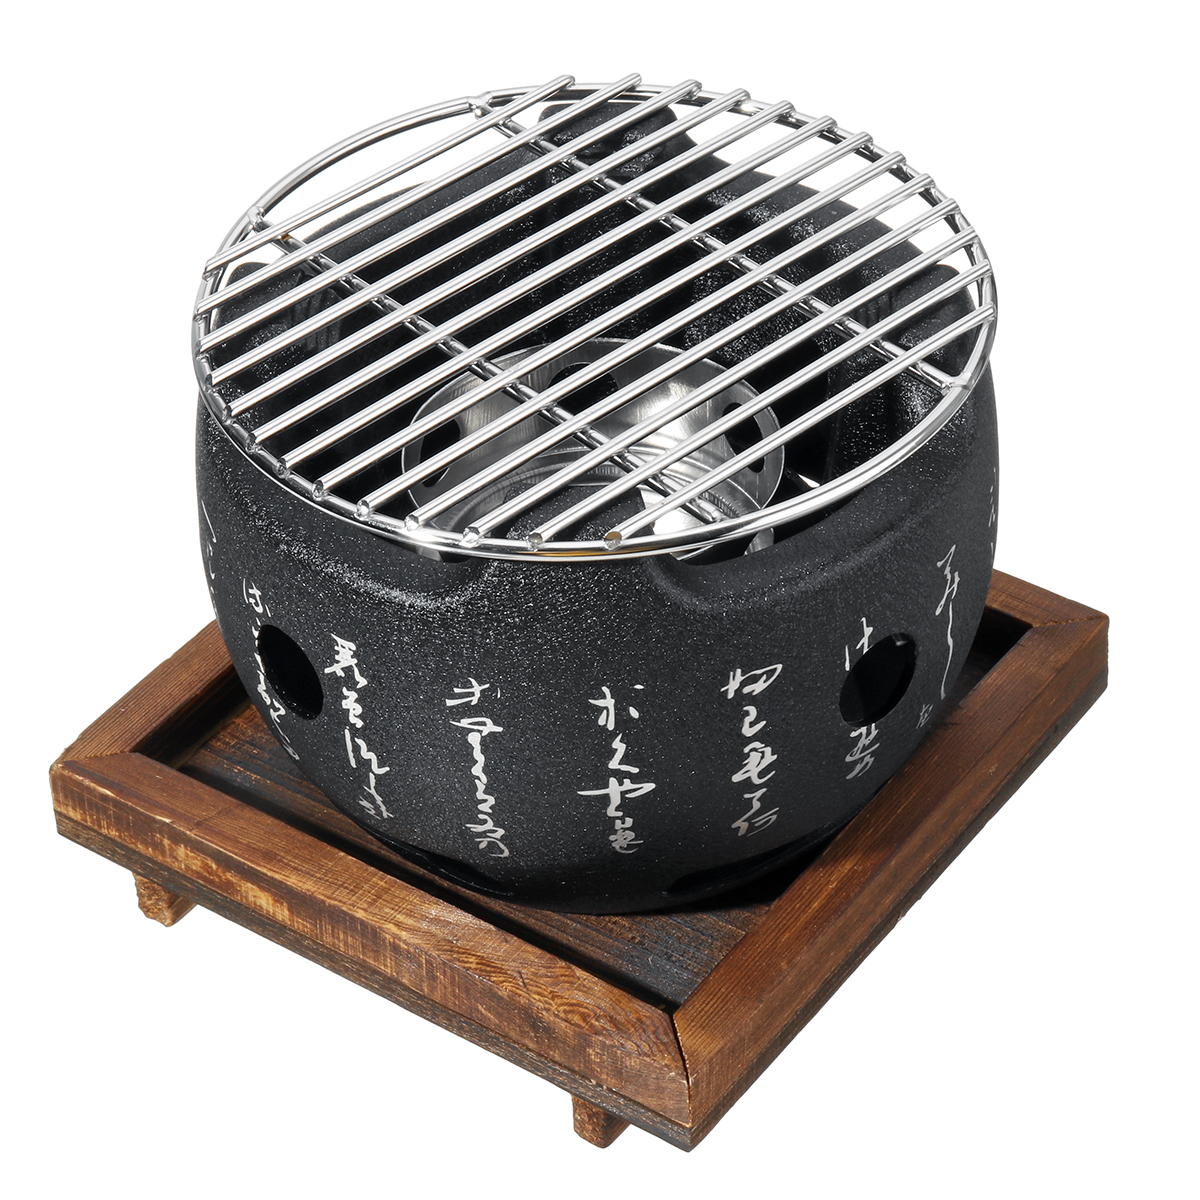 Table Top Outdoor BBQ Grill BBQ Grill Charcoal Grill Japanese Style - image 3 of 11